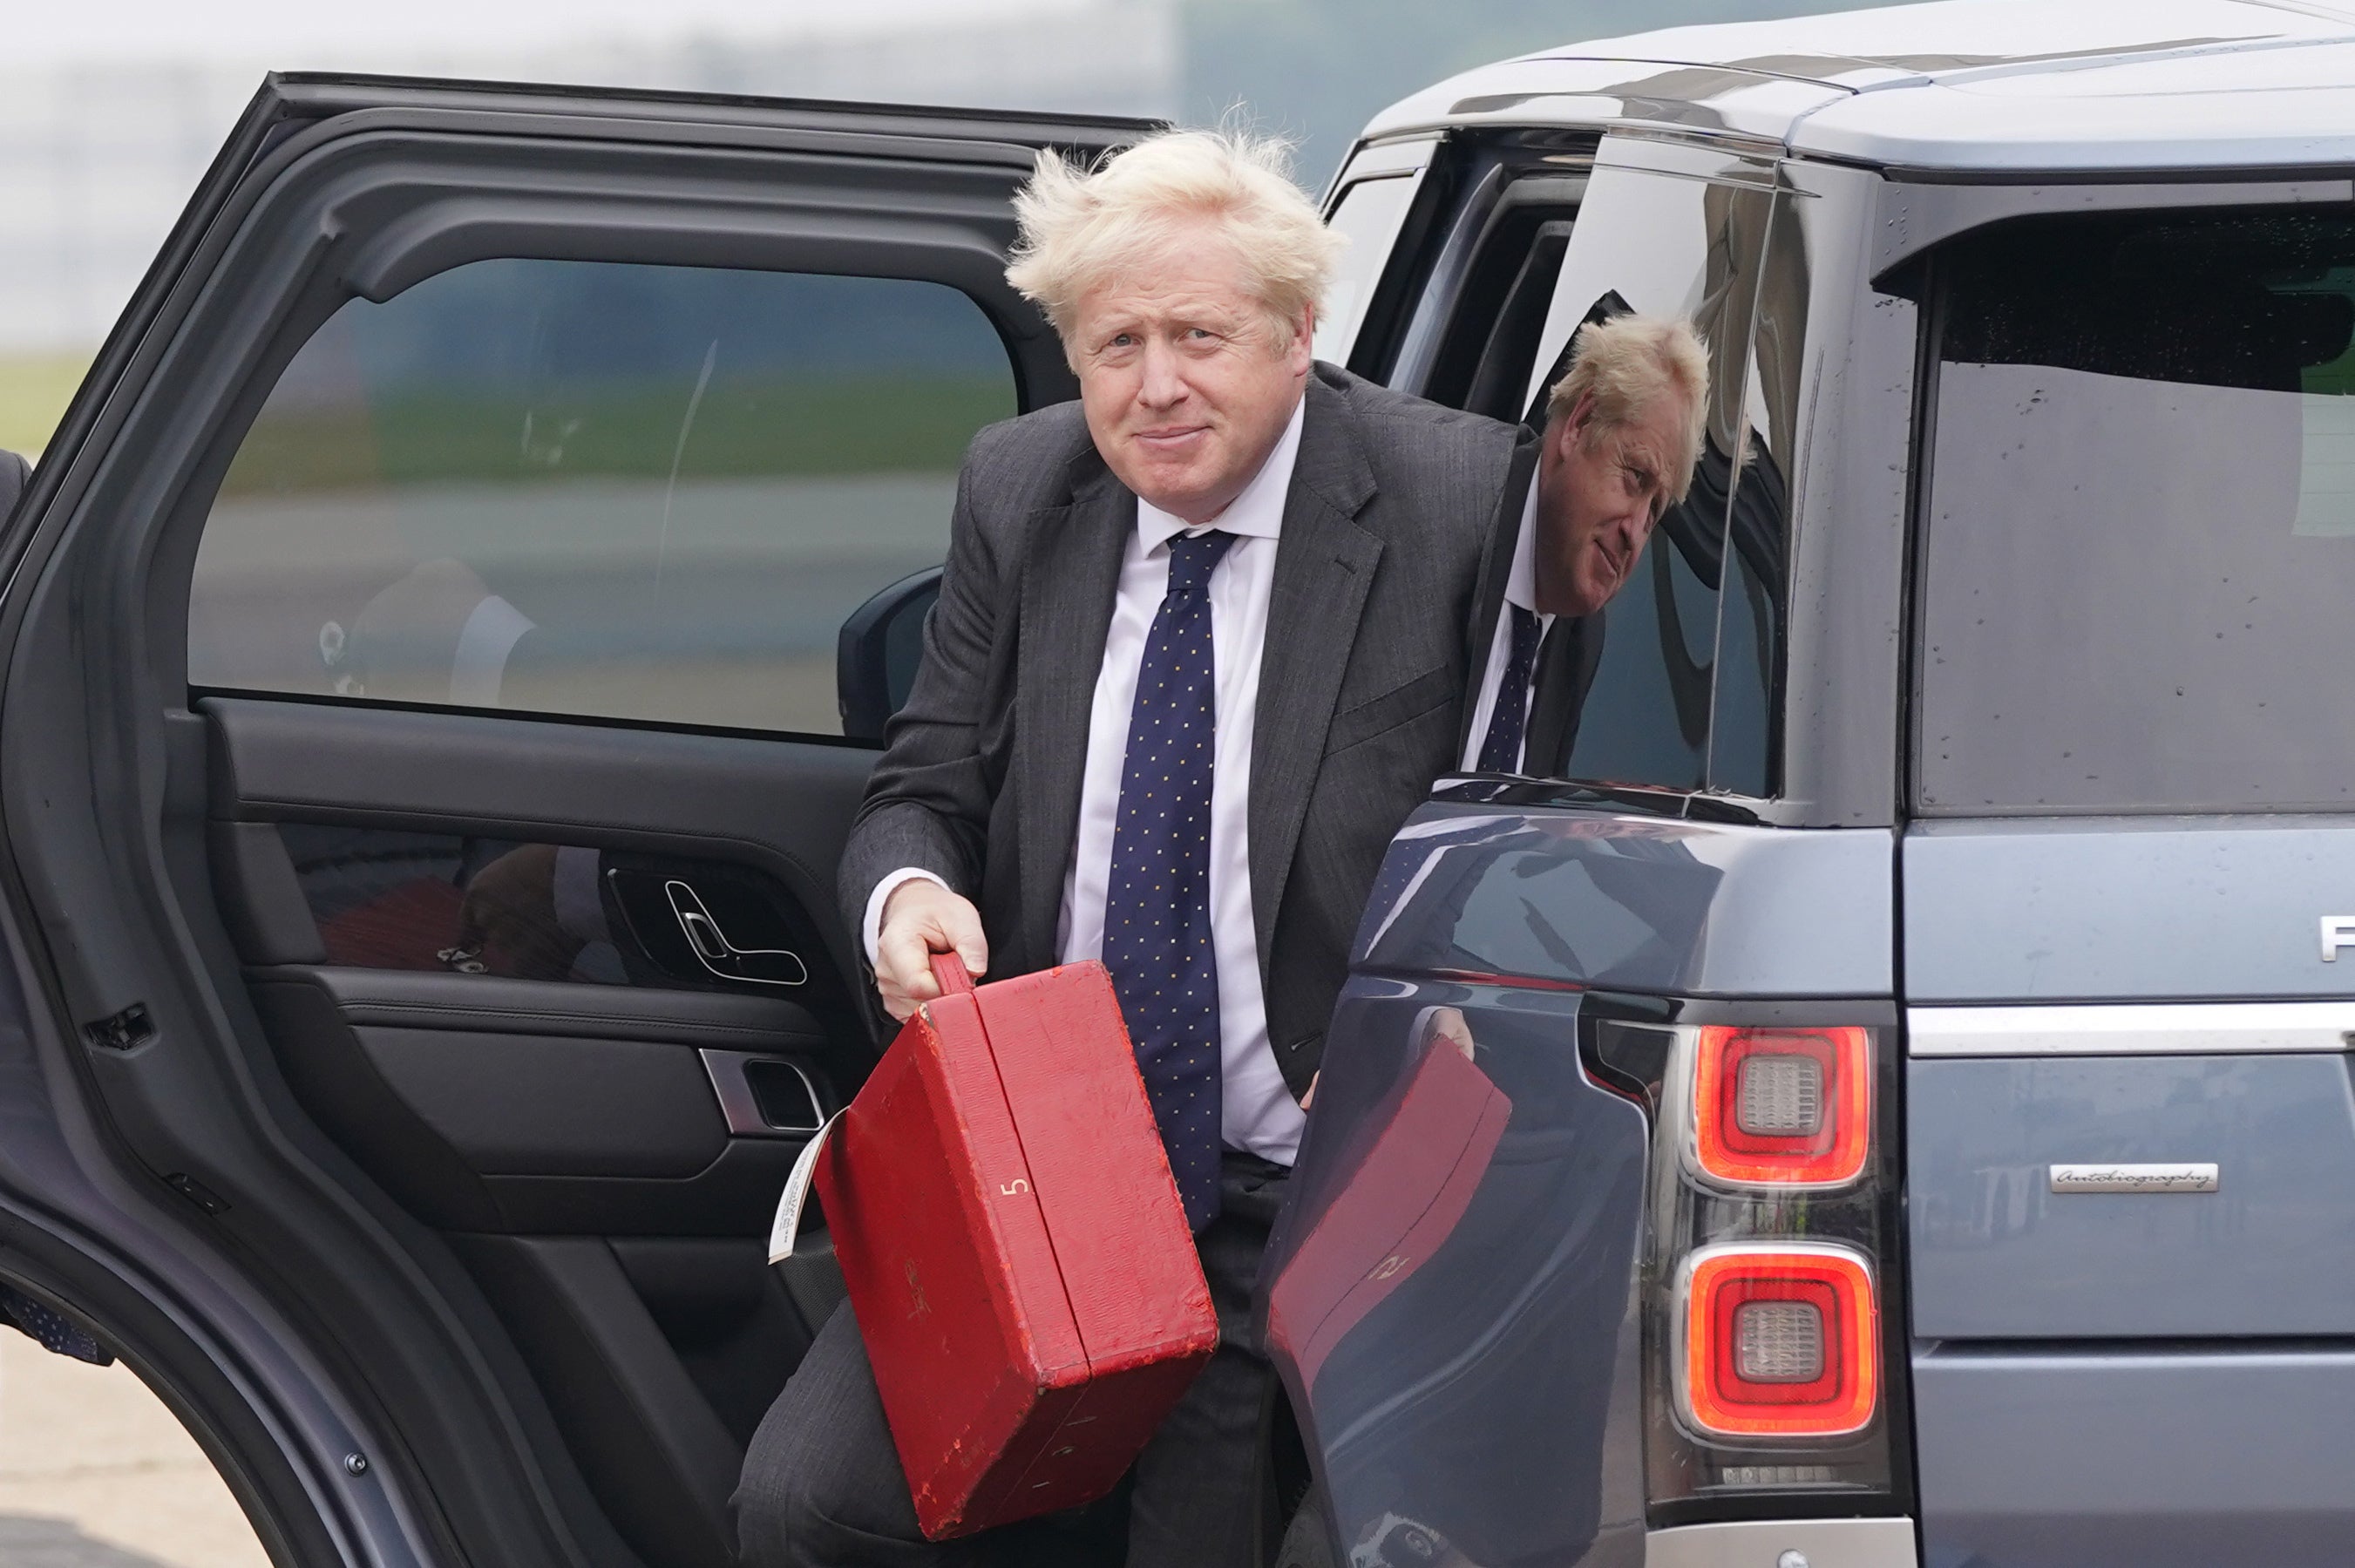 Boris Johnson arrives at Stansted airport to board RAF Voyager ahead of a meeting with President Joe Biden in Washington